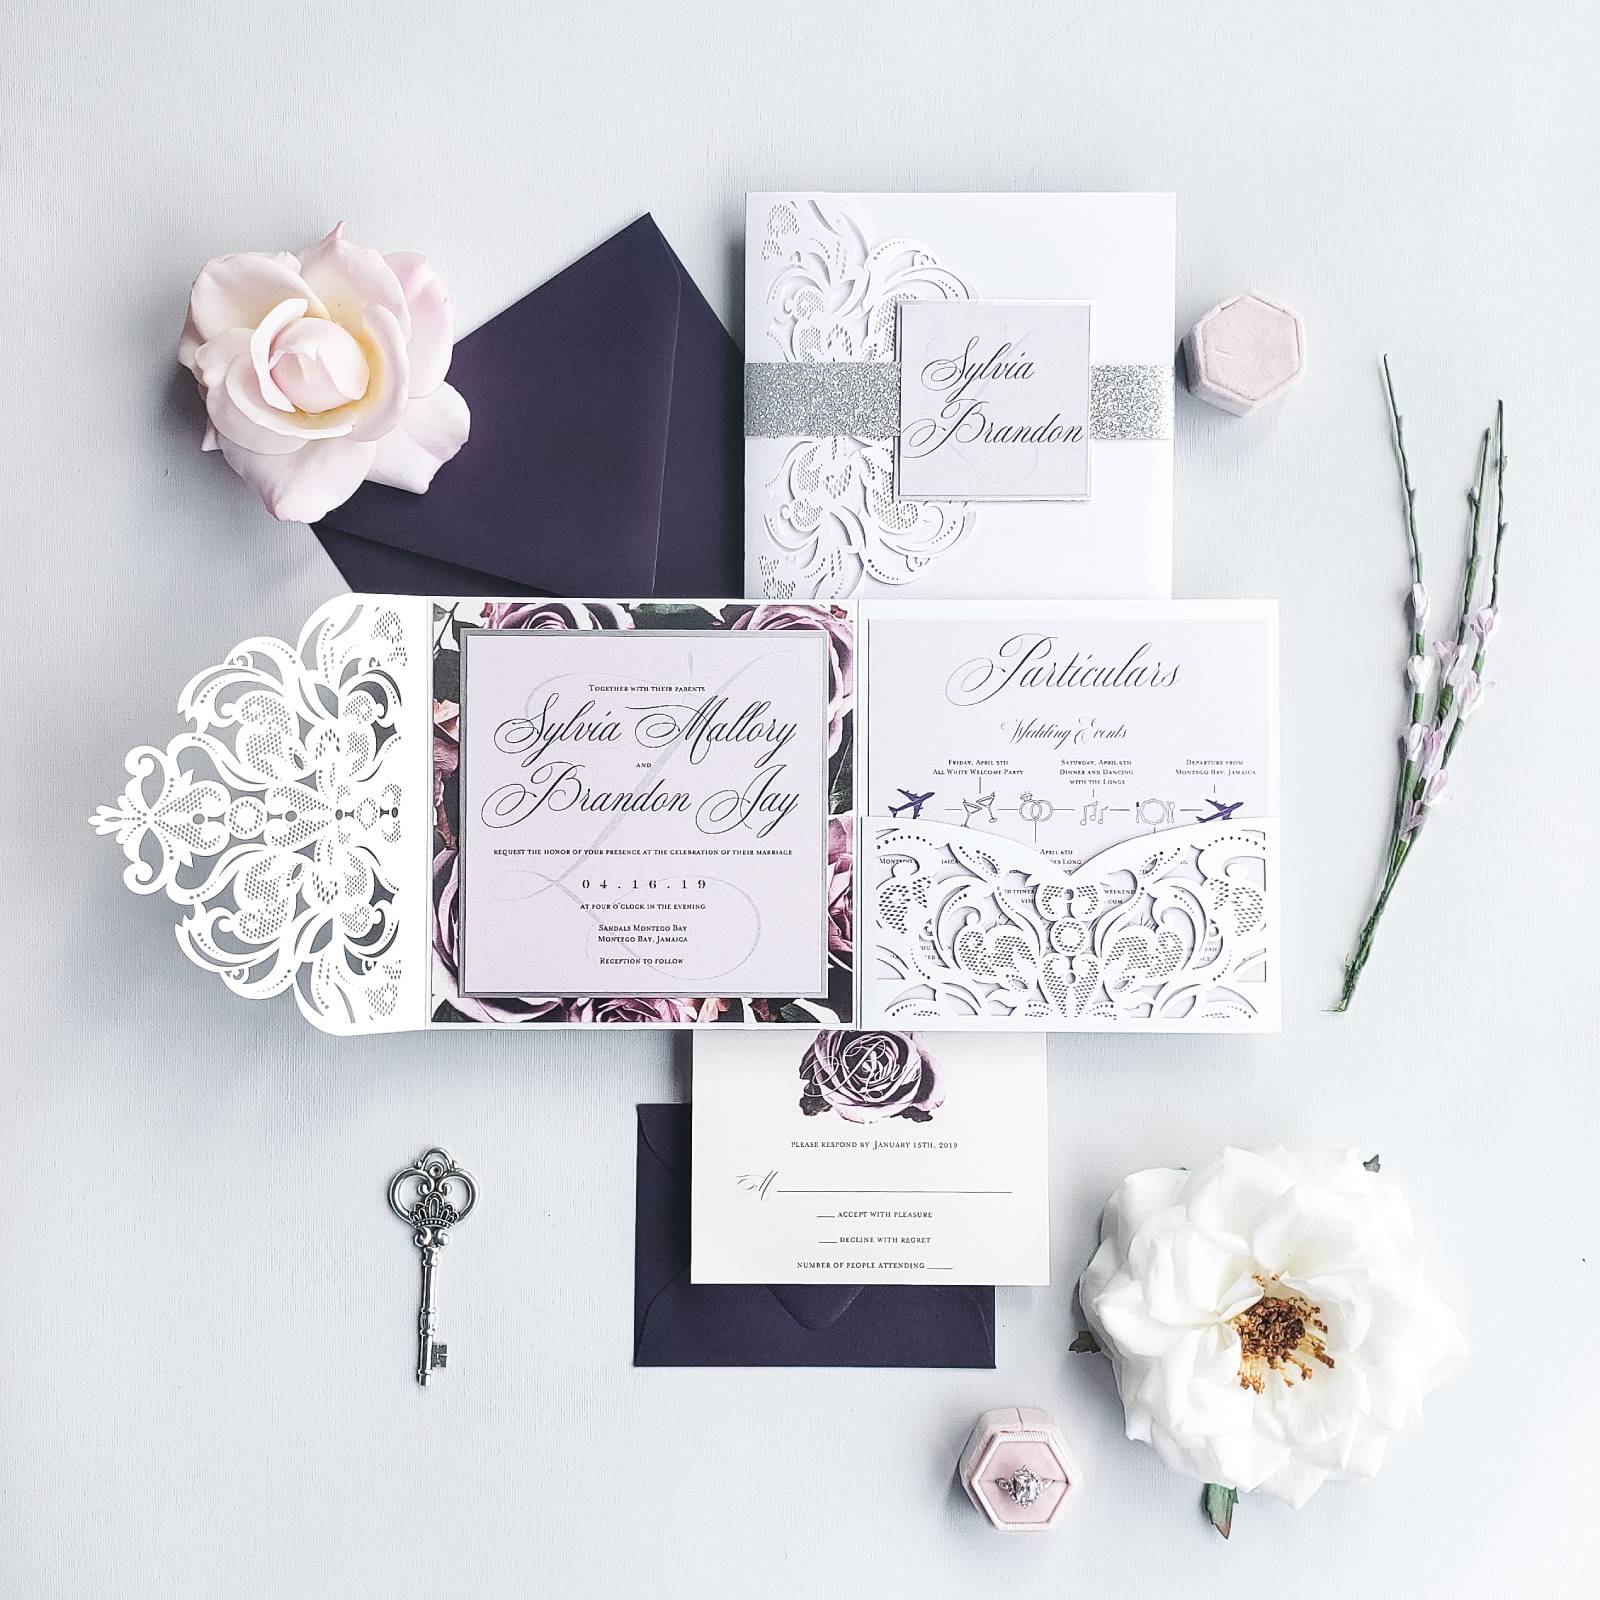 [vc_row][vc_column][vc_column_text]Purchase this listing to get a sample of our Glasgow wedding invitation suite.

The sample includes:

• 5.9